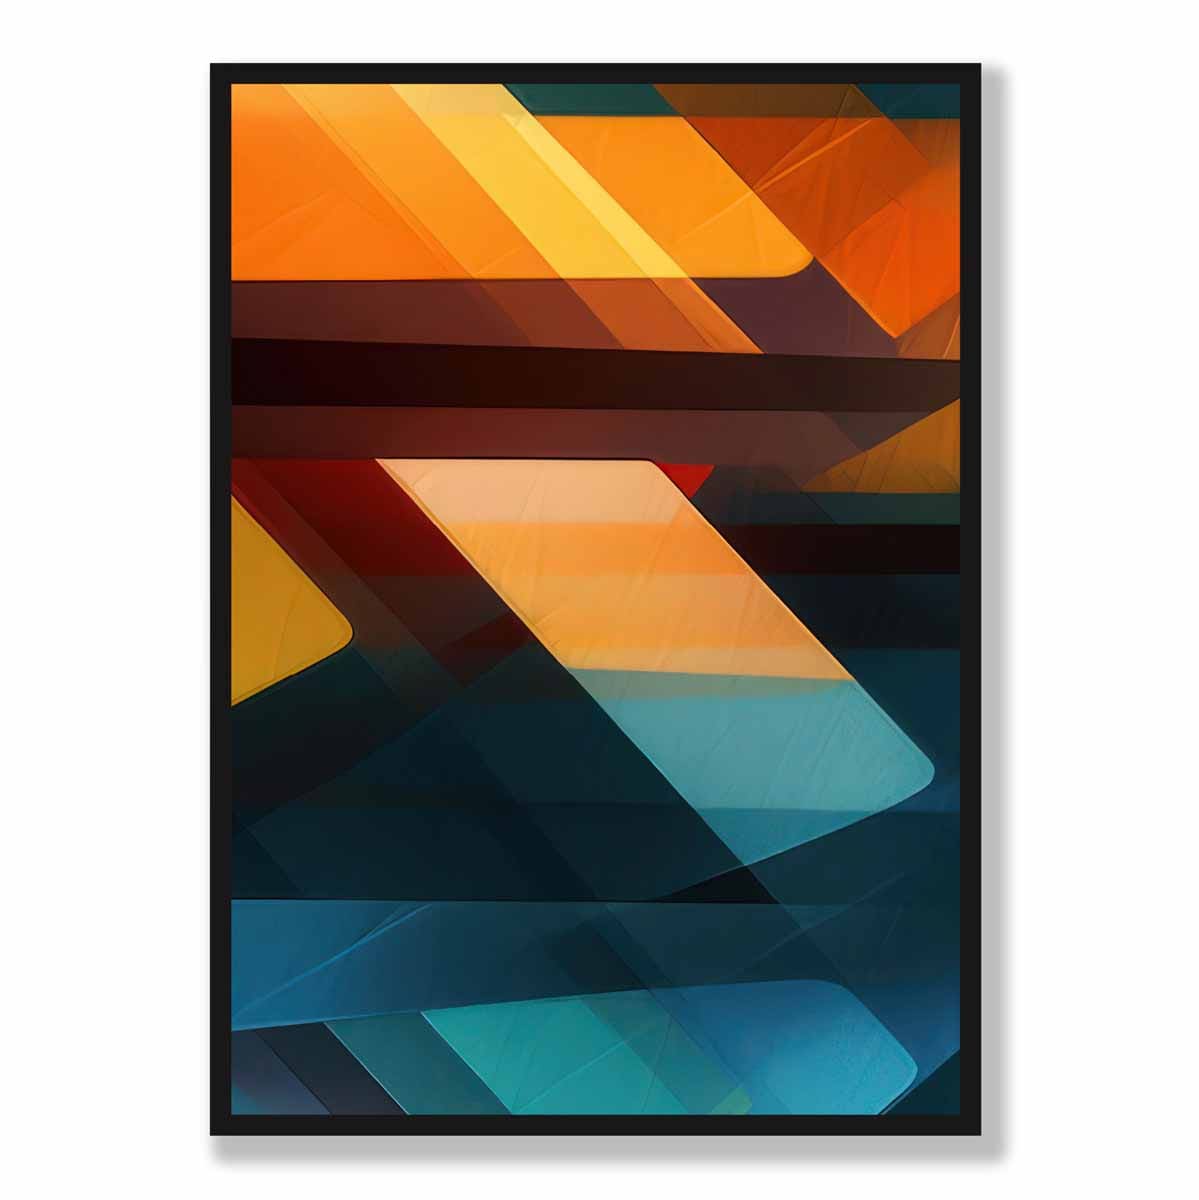 Modern Abstract Shapes and Lines Art Print Blue Orange and Green No 1